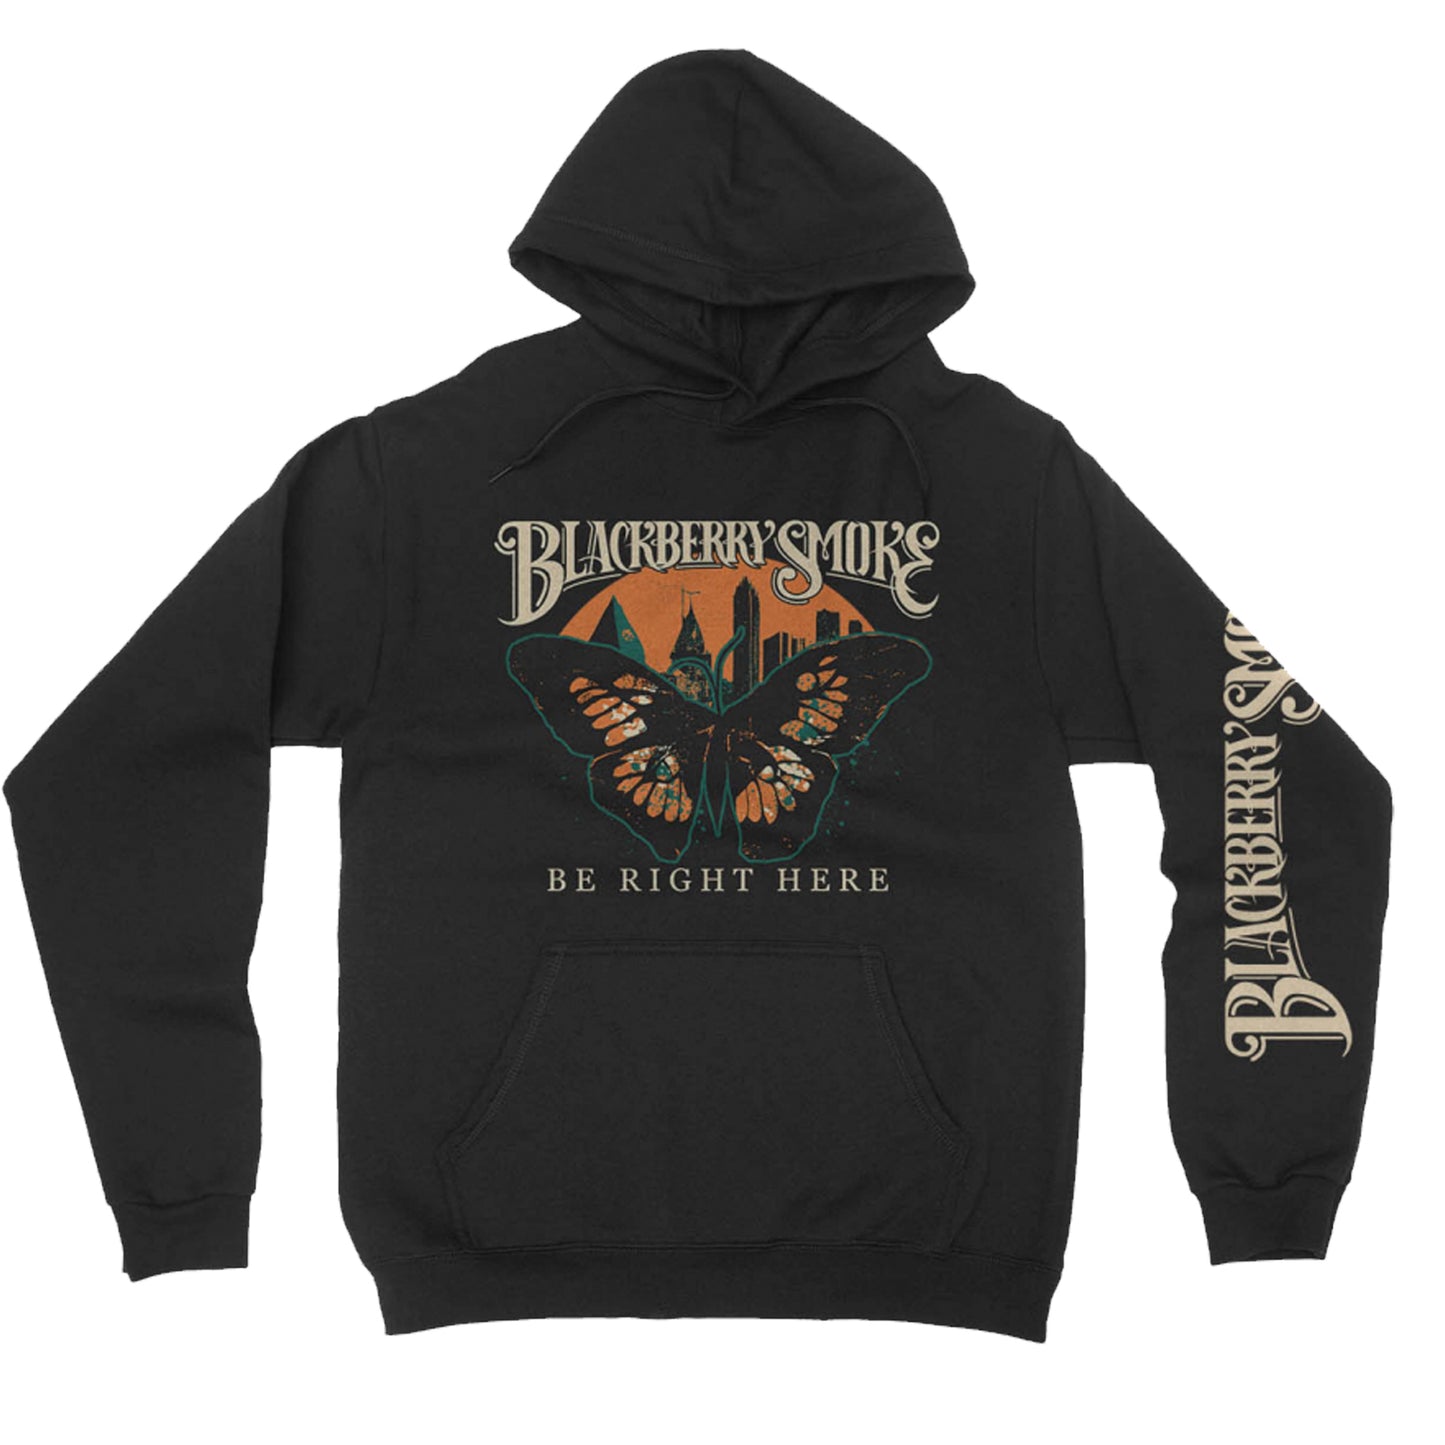 Be Right Here Pullover Hoodie Blackberry Smoke